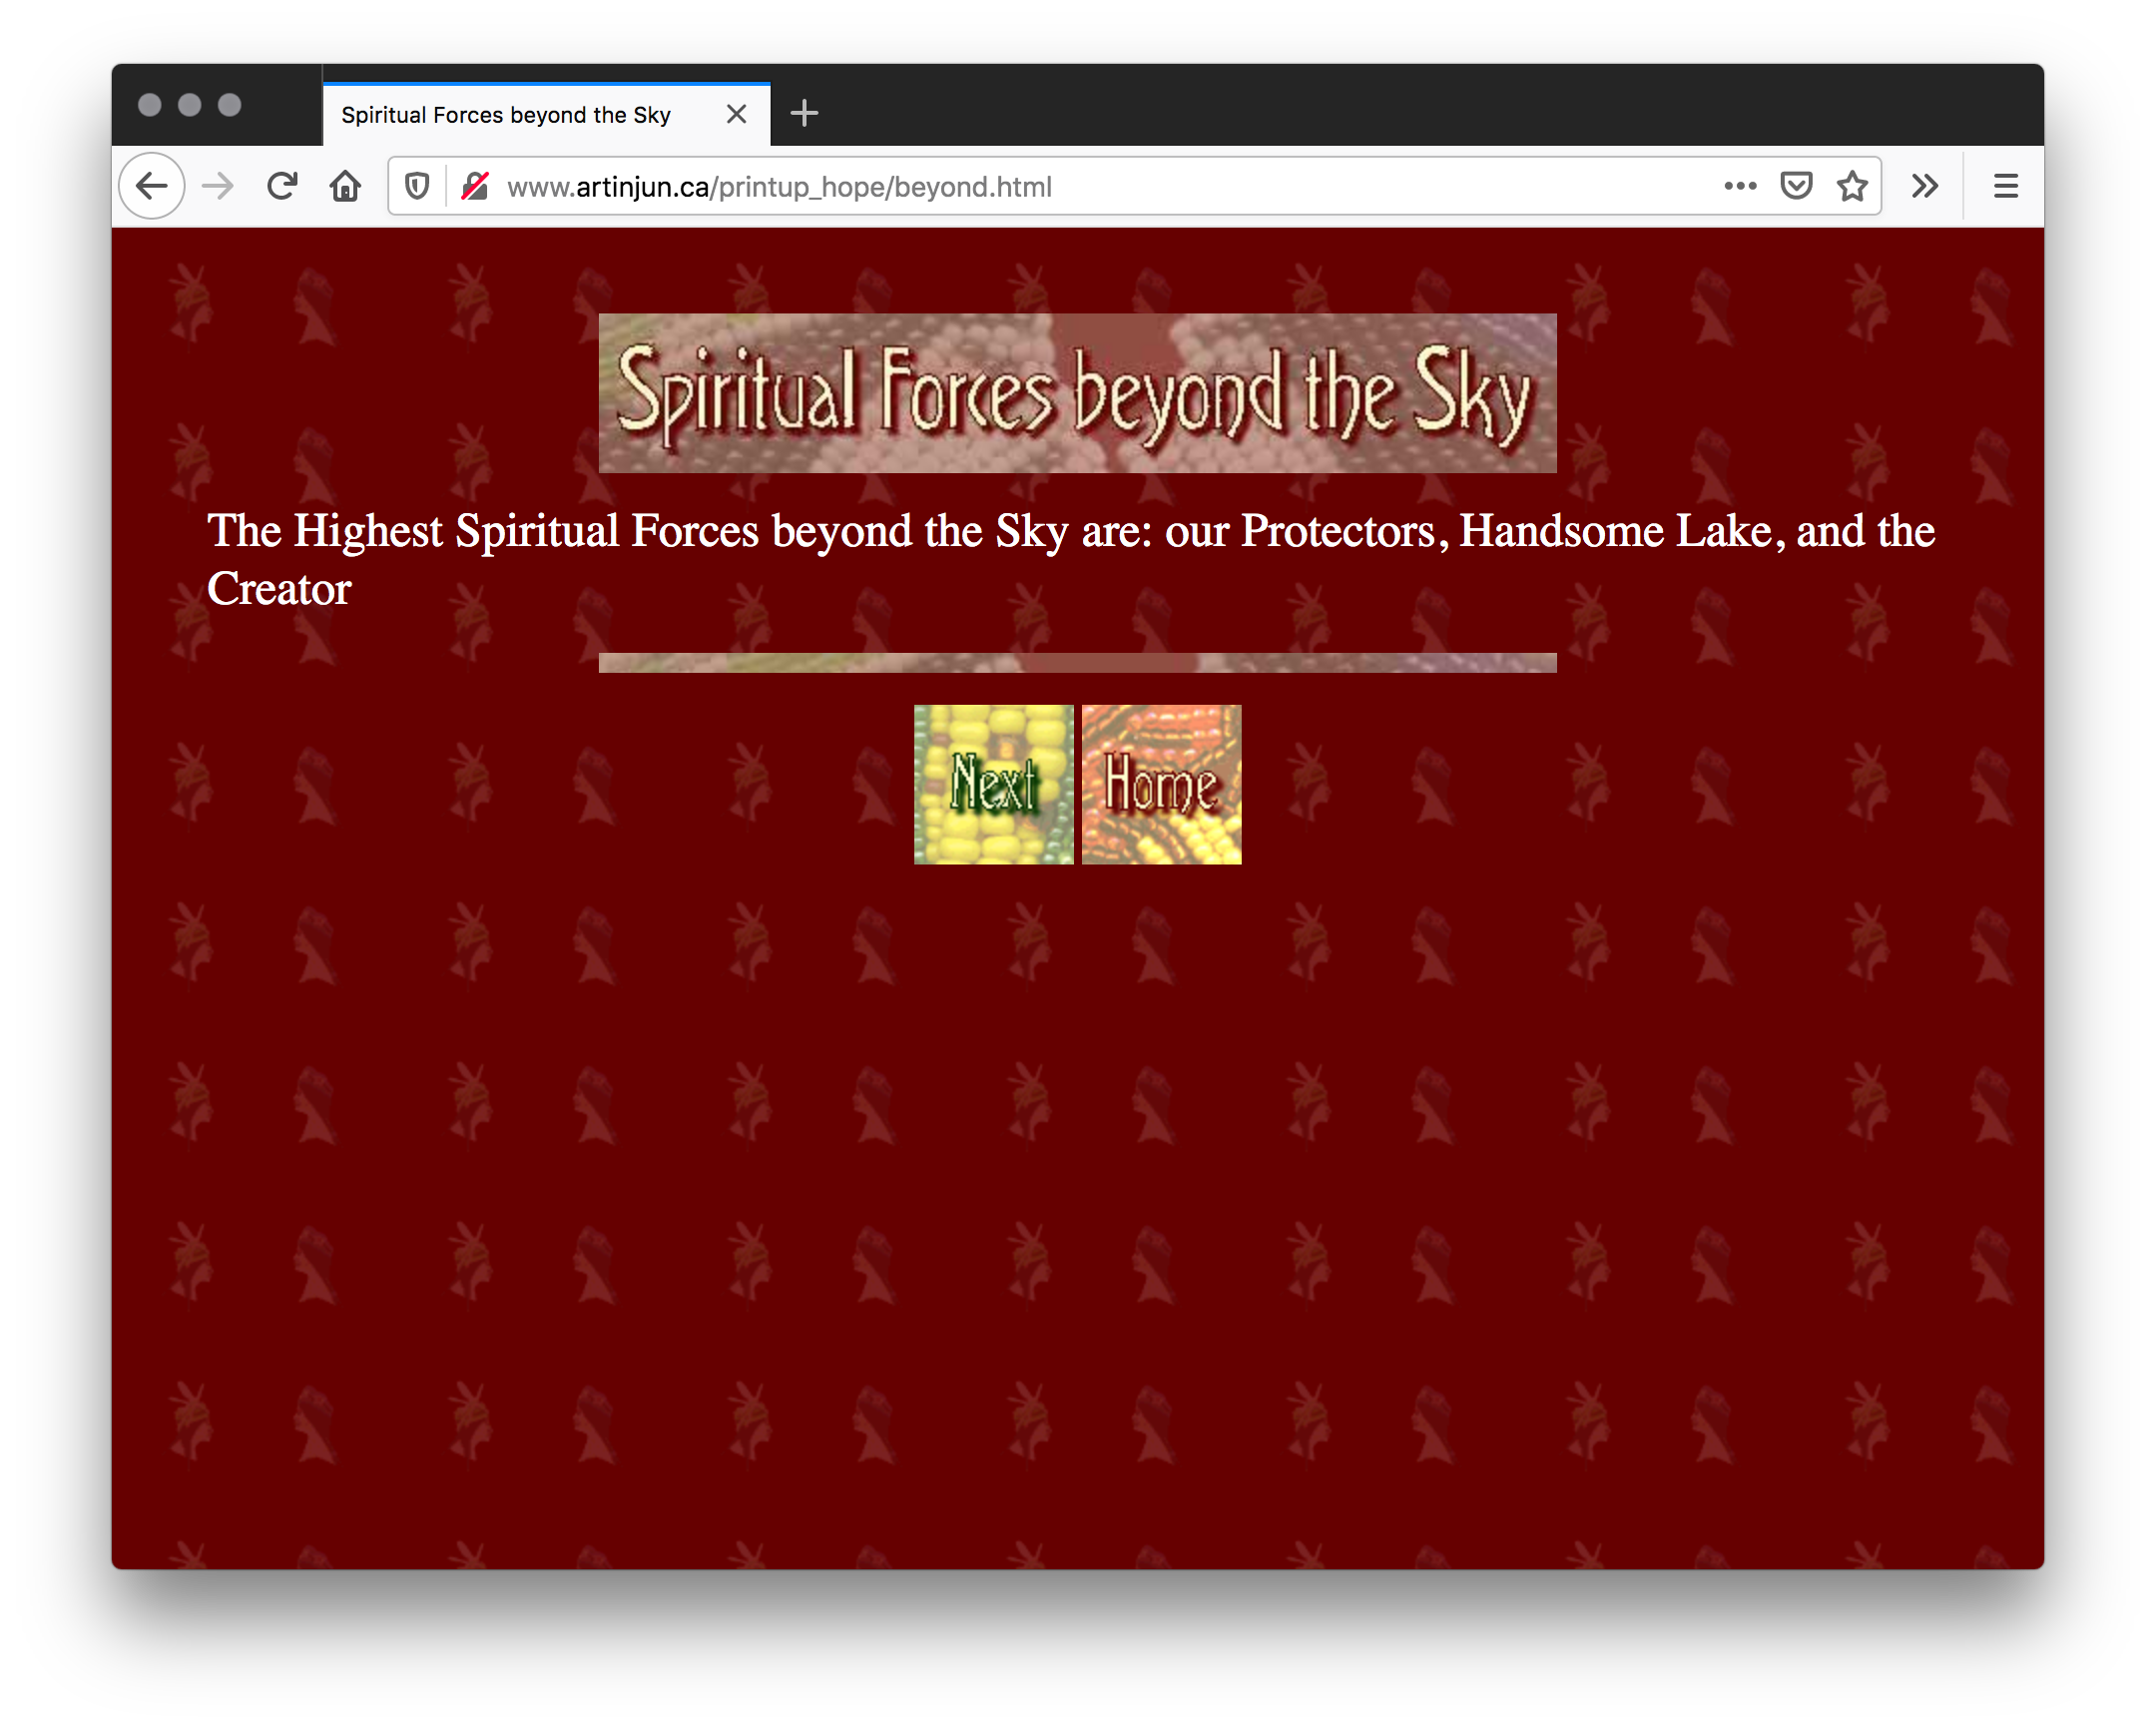 A webpage with lines of white text and a black and white beaded pattern banner with Spiritual Forces Beyond the Sky as the title and next and home buttons in squares below. The background is red with tiles of a graphic Native American facing a pilgrim.